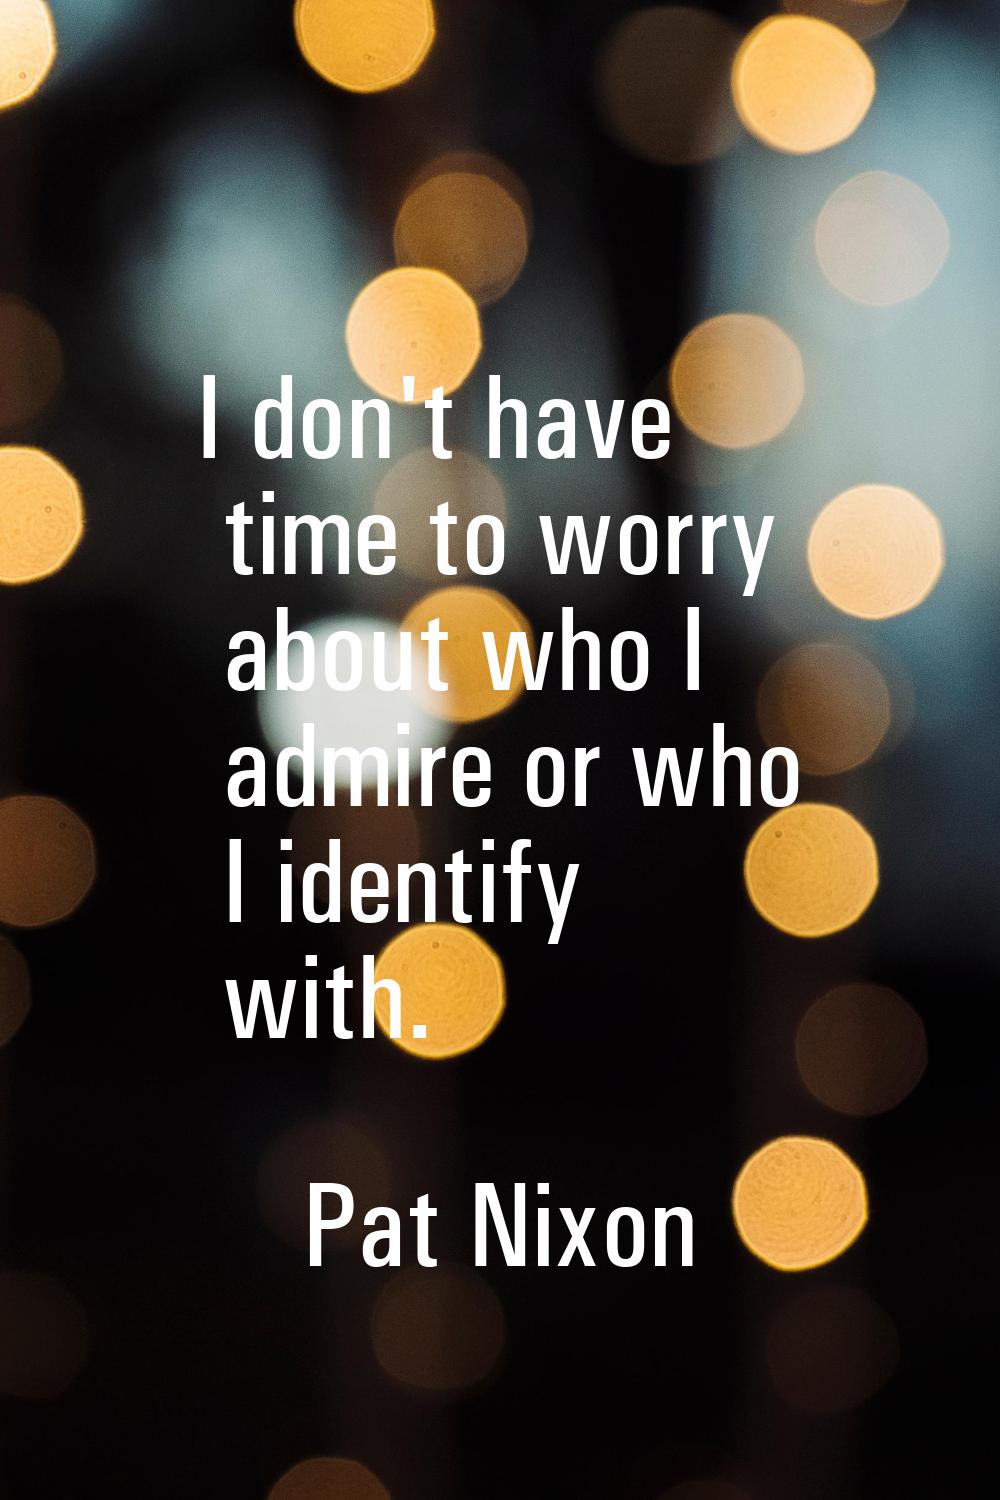 I don't have time to worry about who I admire or who I identify with.